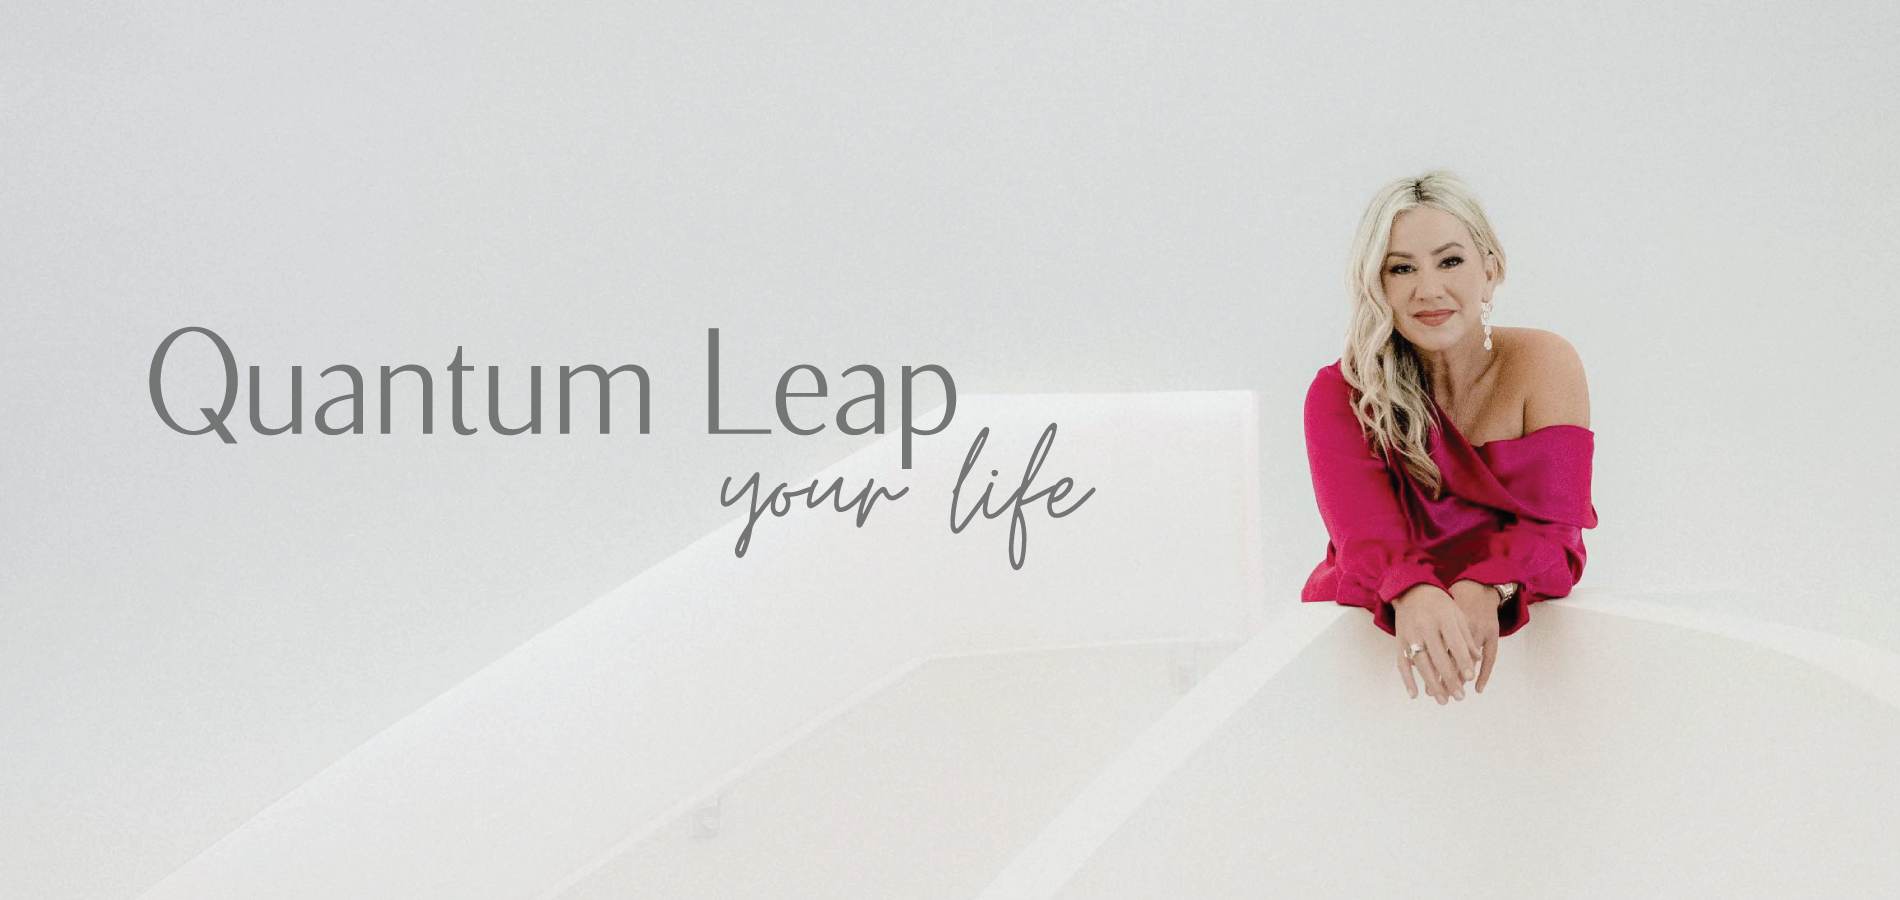 Quantum Leap Your Life with Suzanne Adams